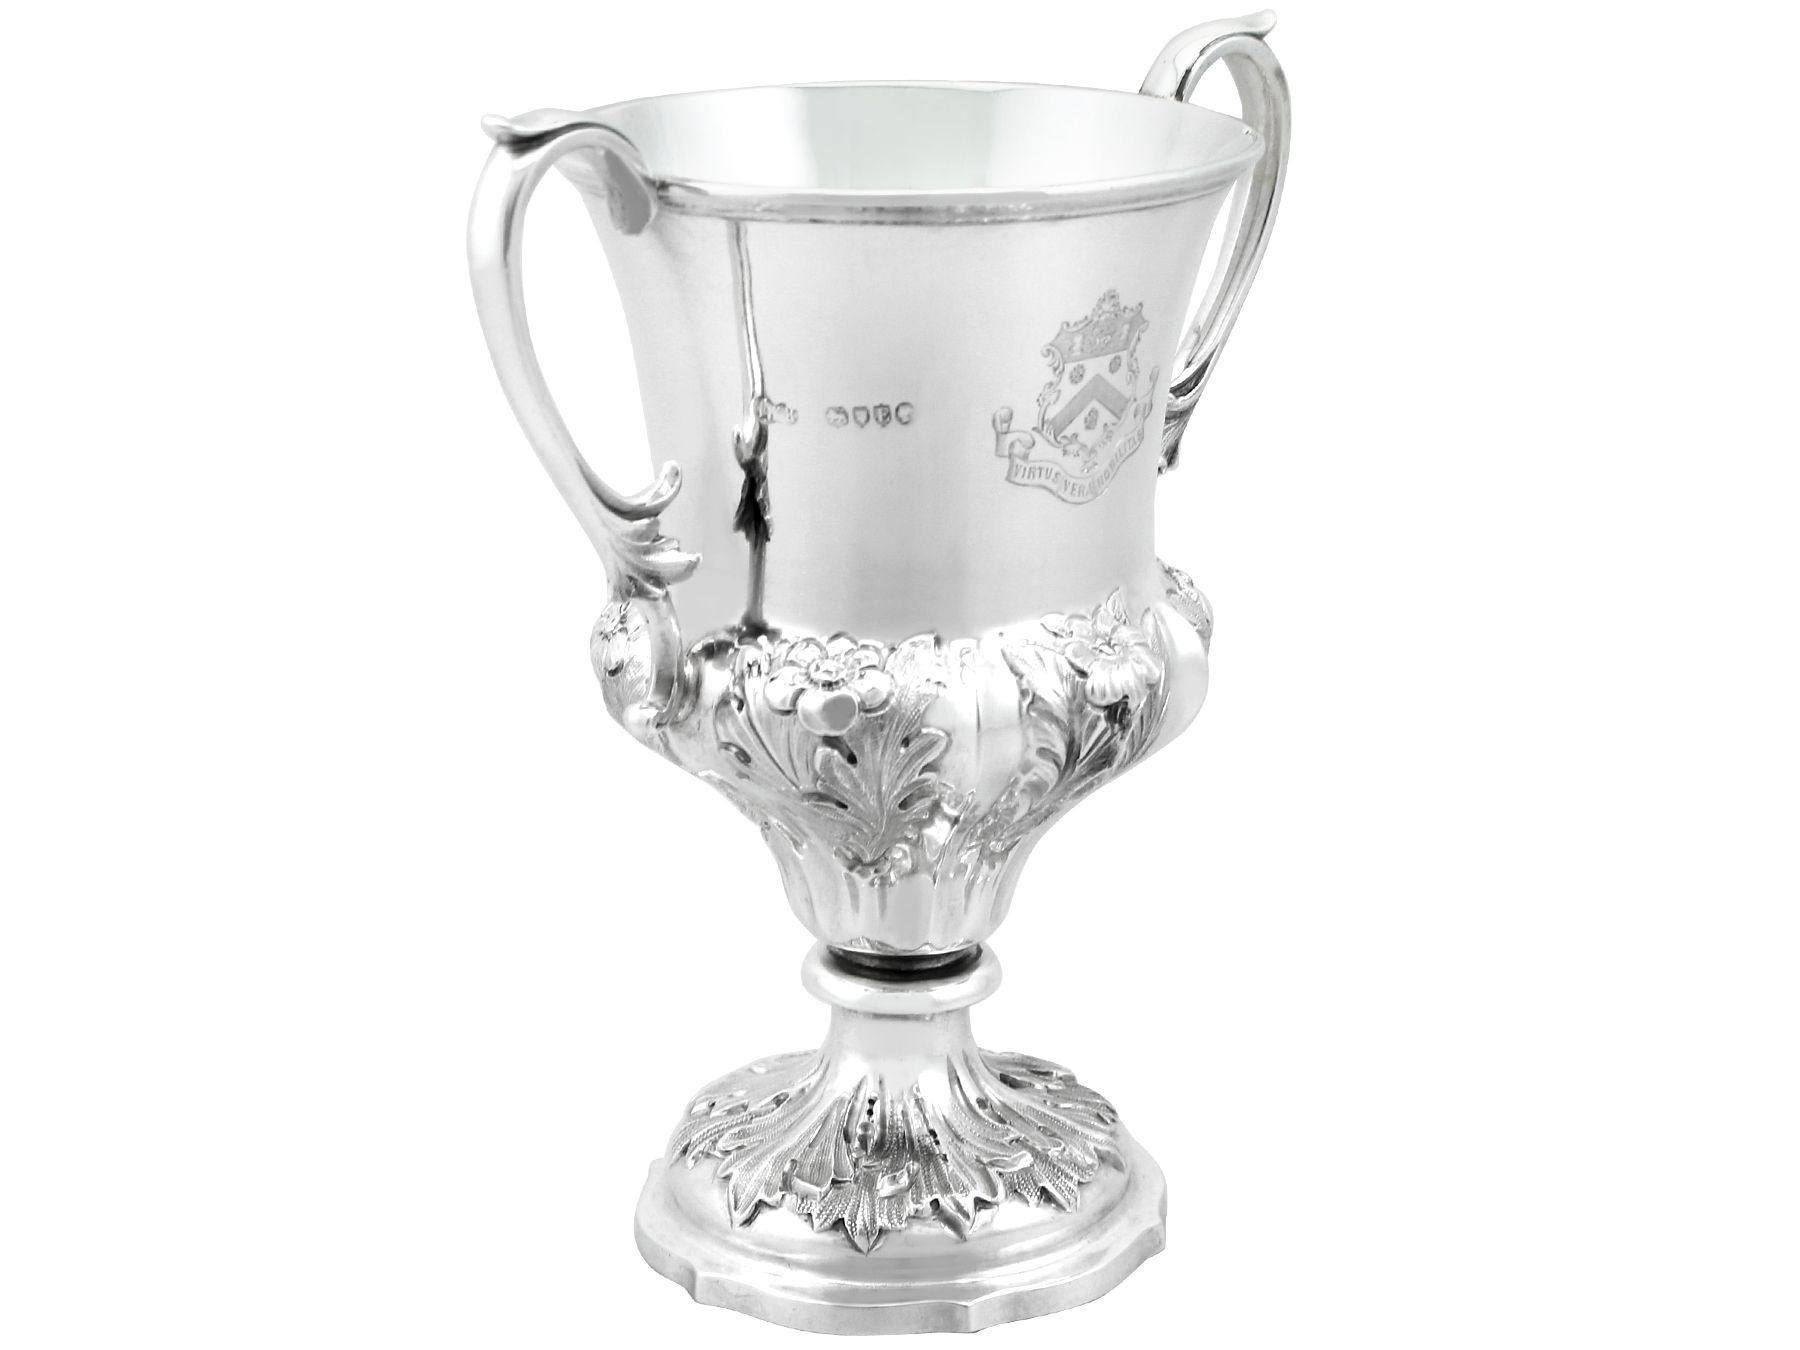 An exceptional, fine and impressive, antique Victorian English sterling silver cup; an addition to our Victorian silverware collection

This exceptional antique Victorian sterling silver presentation cup has a campania shaped form to a circular